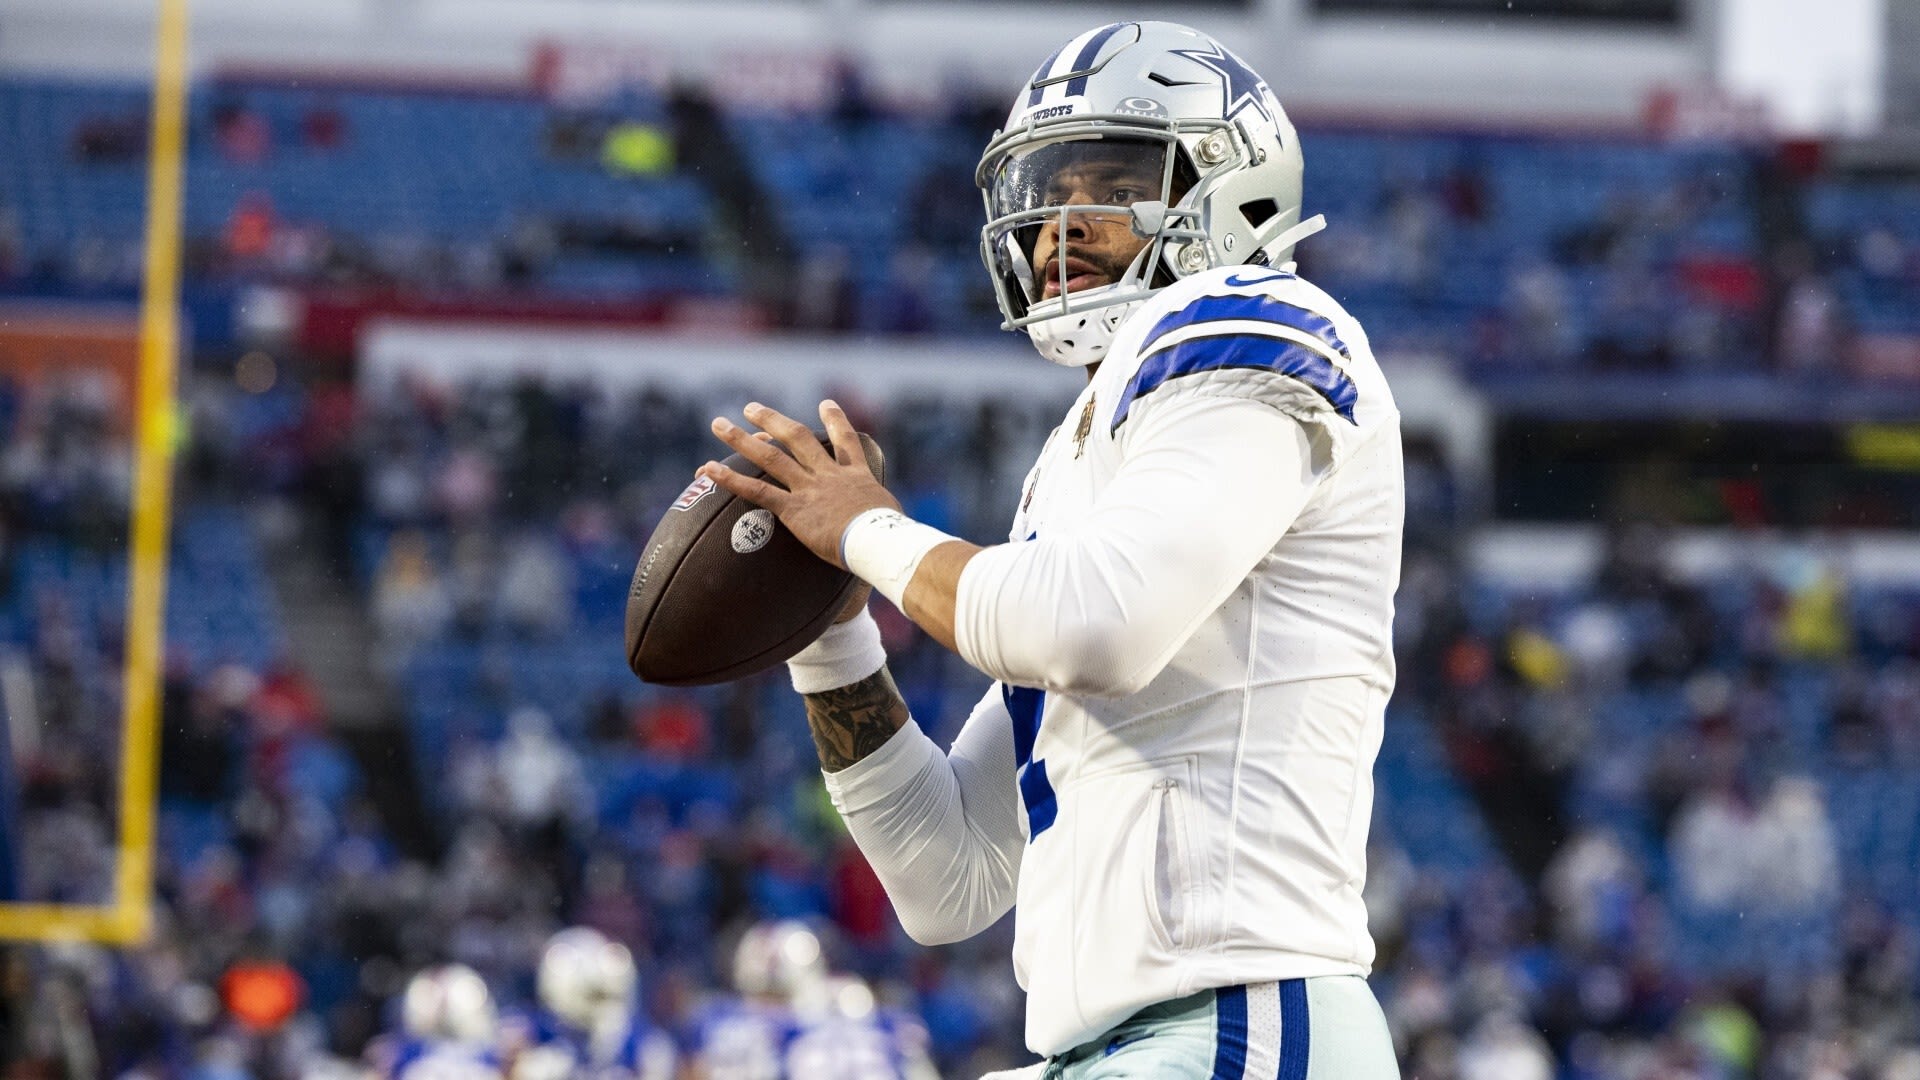 What's the end game for Dak Prescott and the Cowboys?